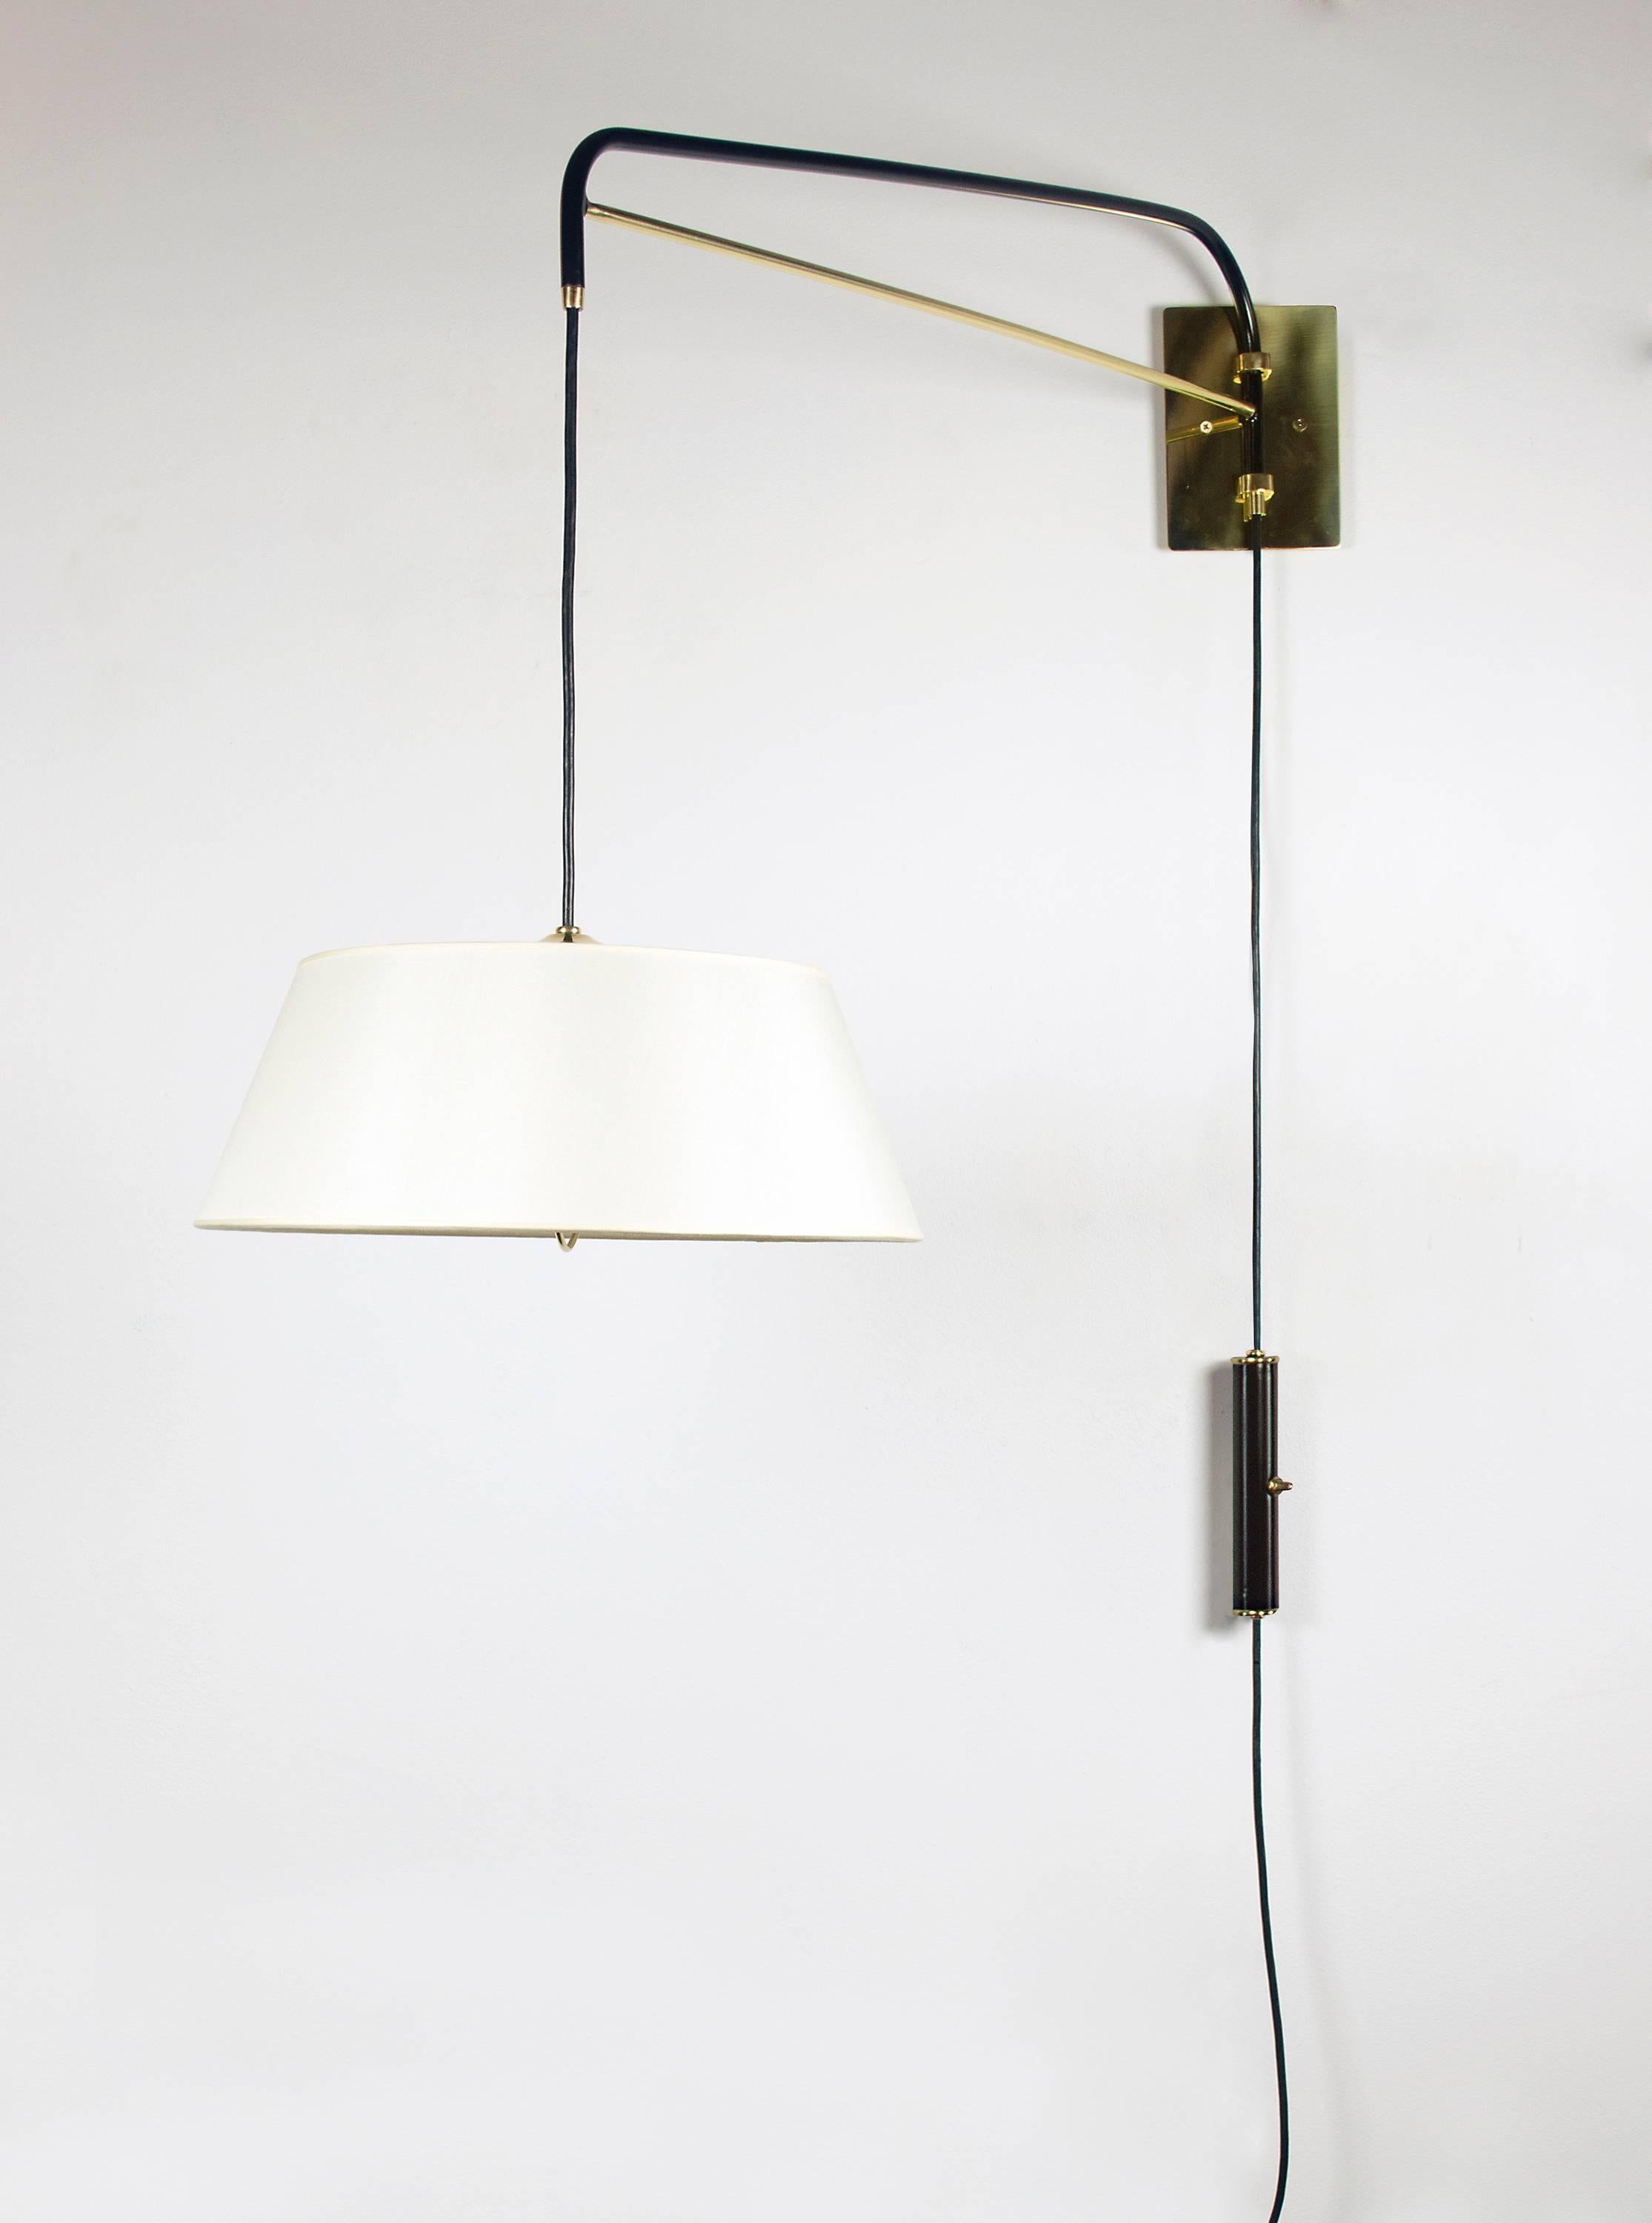 Two graceful wall sconces which are handcrafted with a black enamel finish and polished brass. An elegant linen shade diffuses a soft light. This fixture is adjustable, the switched counter weight system allow for height adjustments while the arm